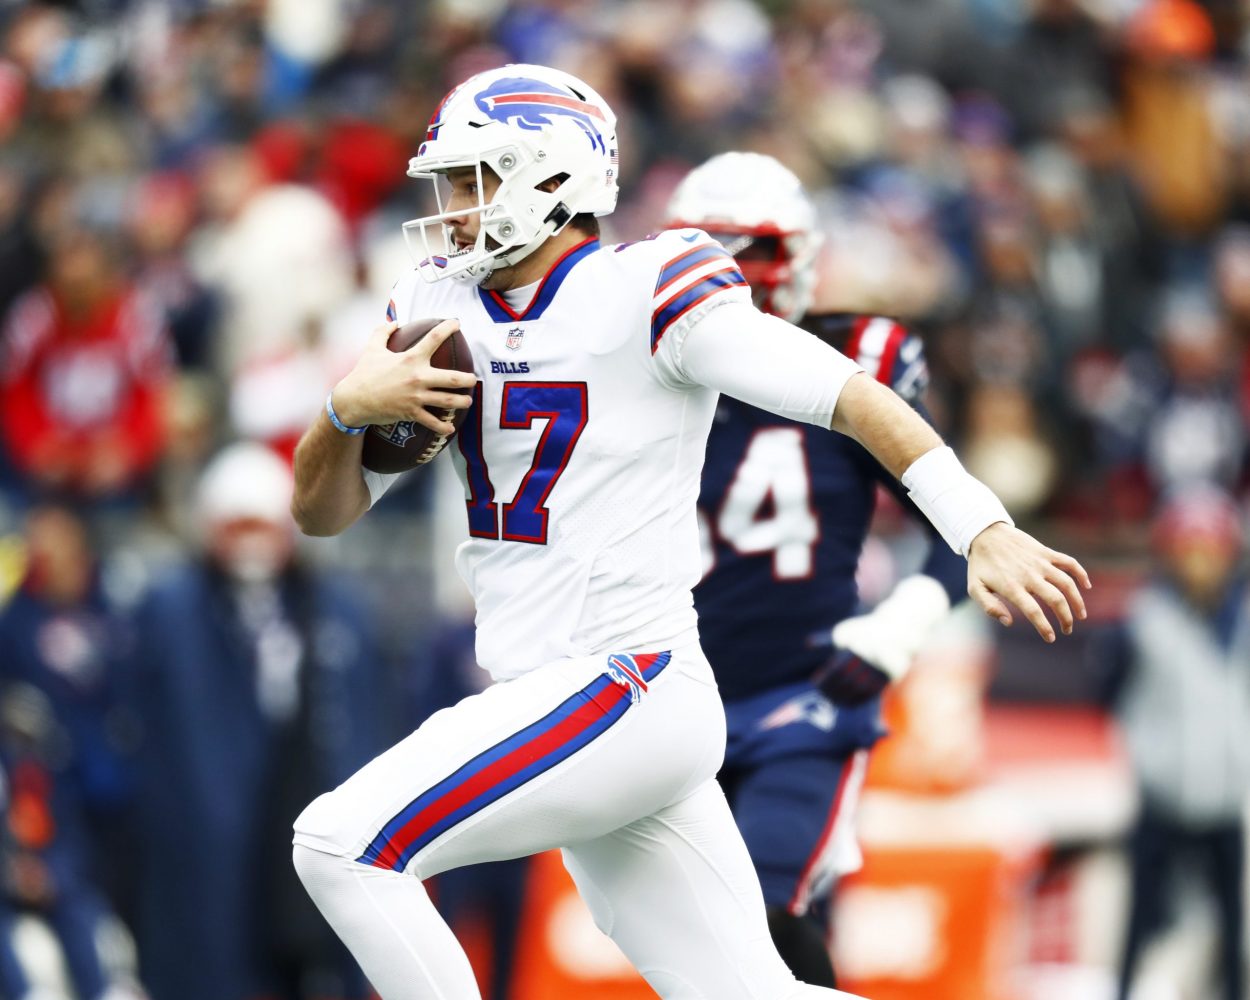 Bills QB Josh Allen Draws Intriguing Cam Newton Comparison From Chiefs LB Anthony Hitchens Ahead of AFC Championship Game Rematch